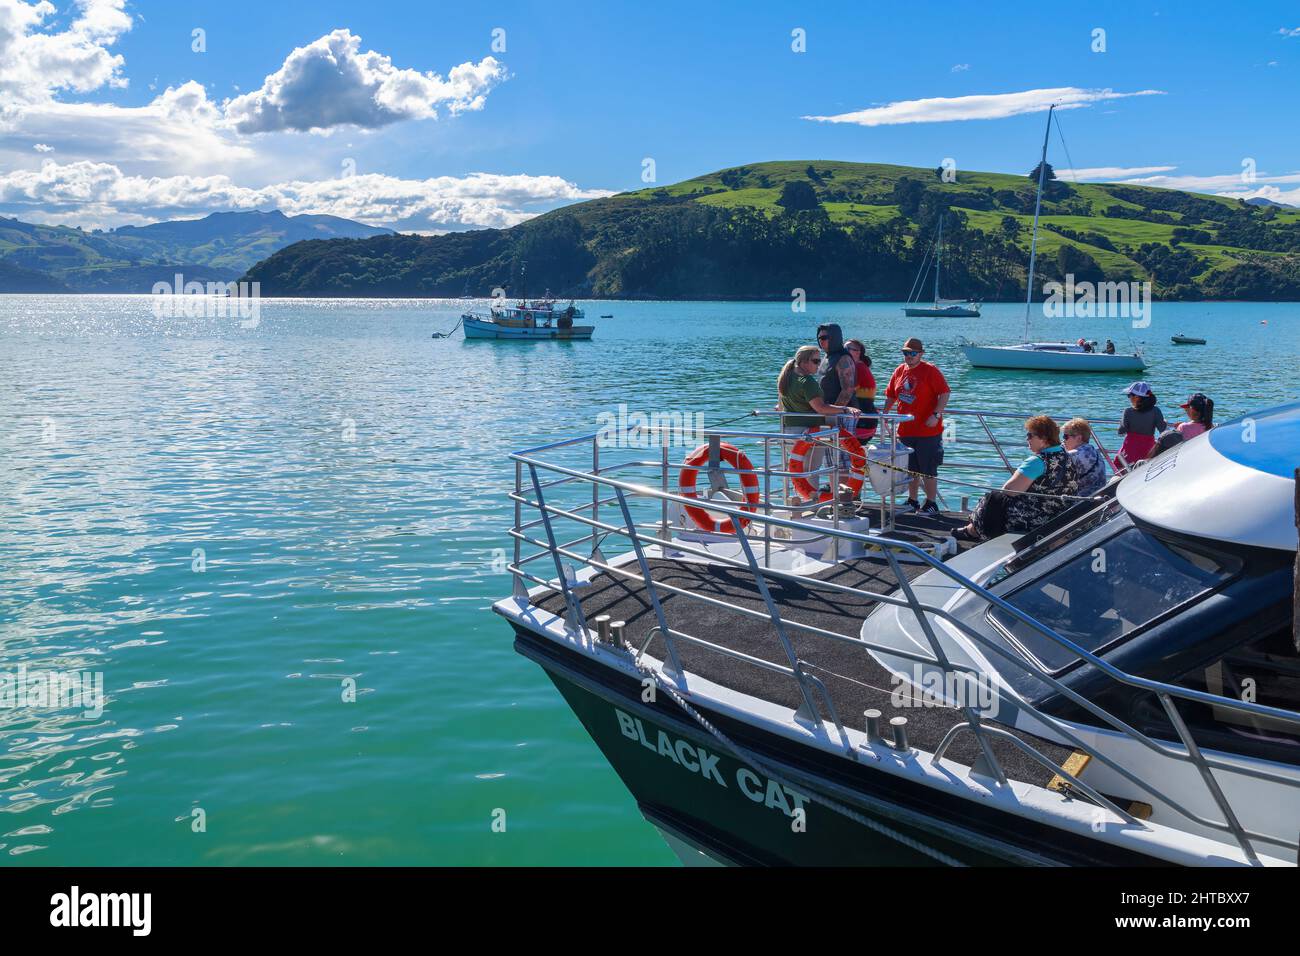 A Black Cat Cruises catamaran prepares to leave on a nature cruise in Akaroa Harbour, New Zealand Stock Photo